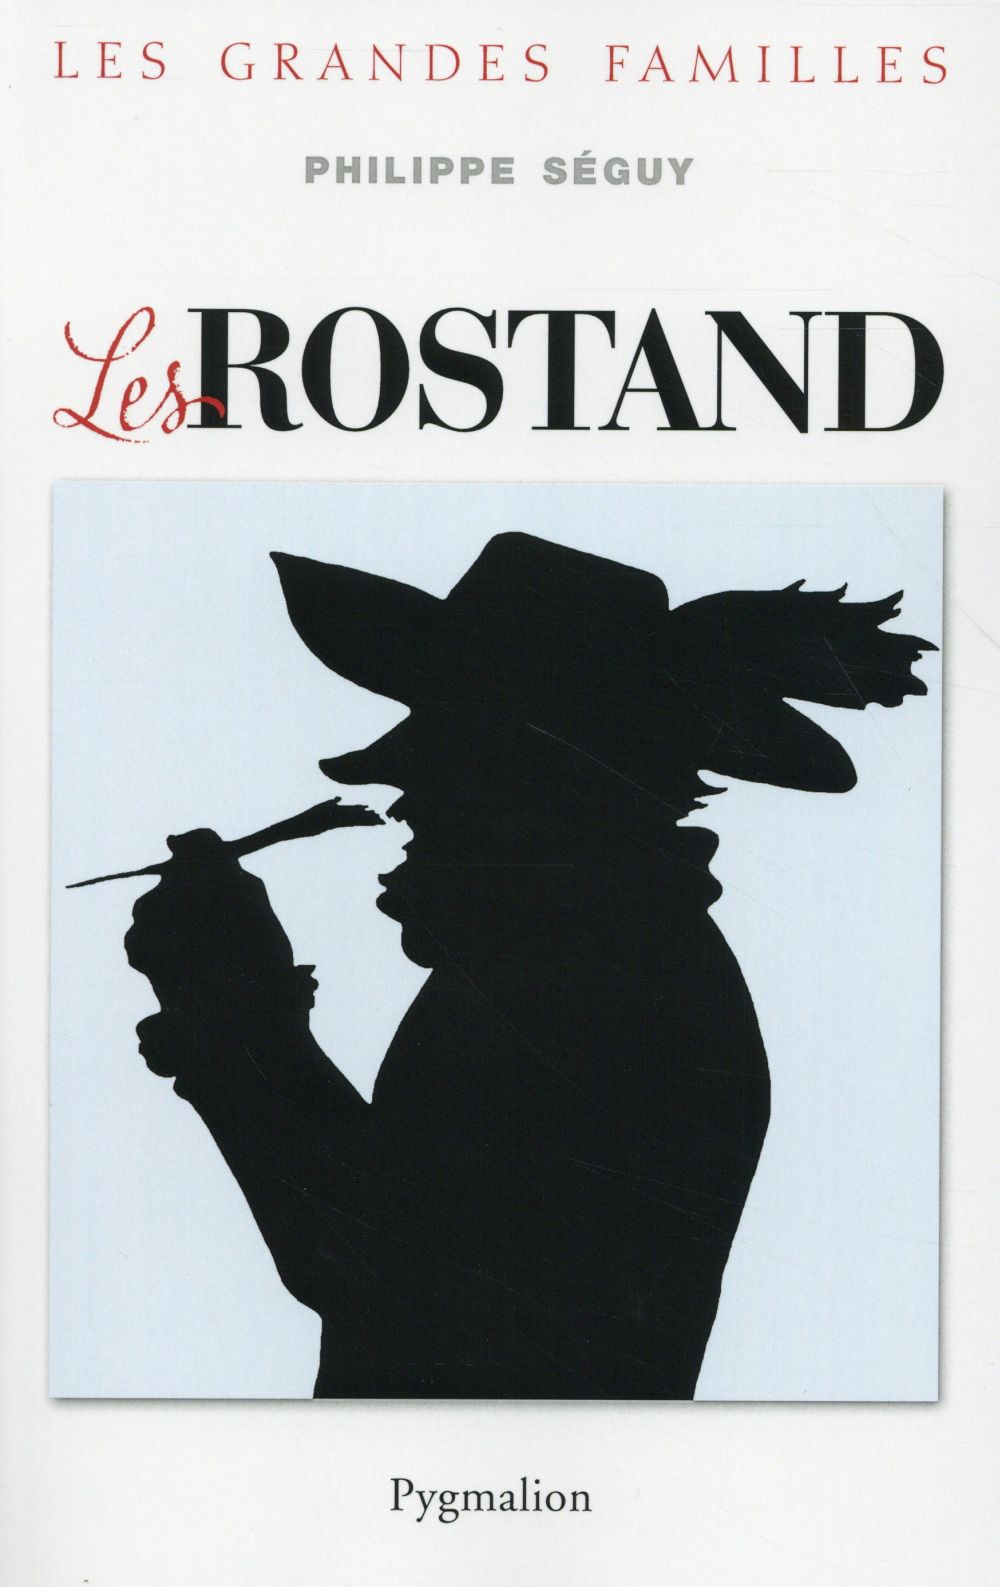 LES ROSTAND